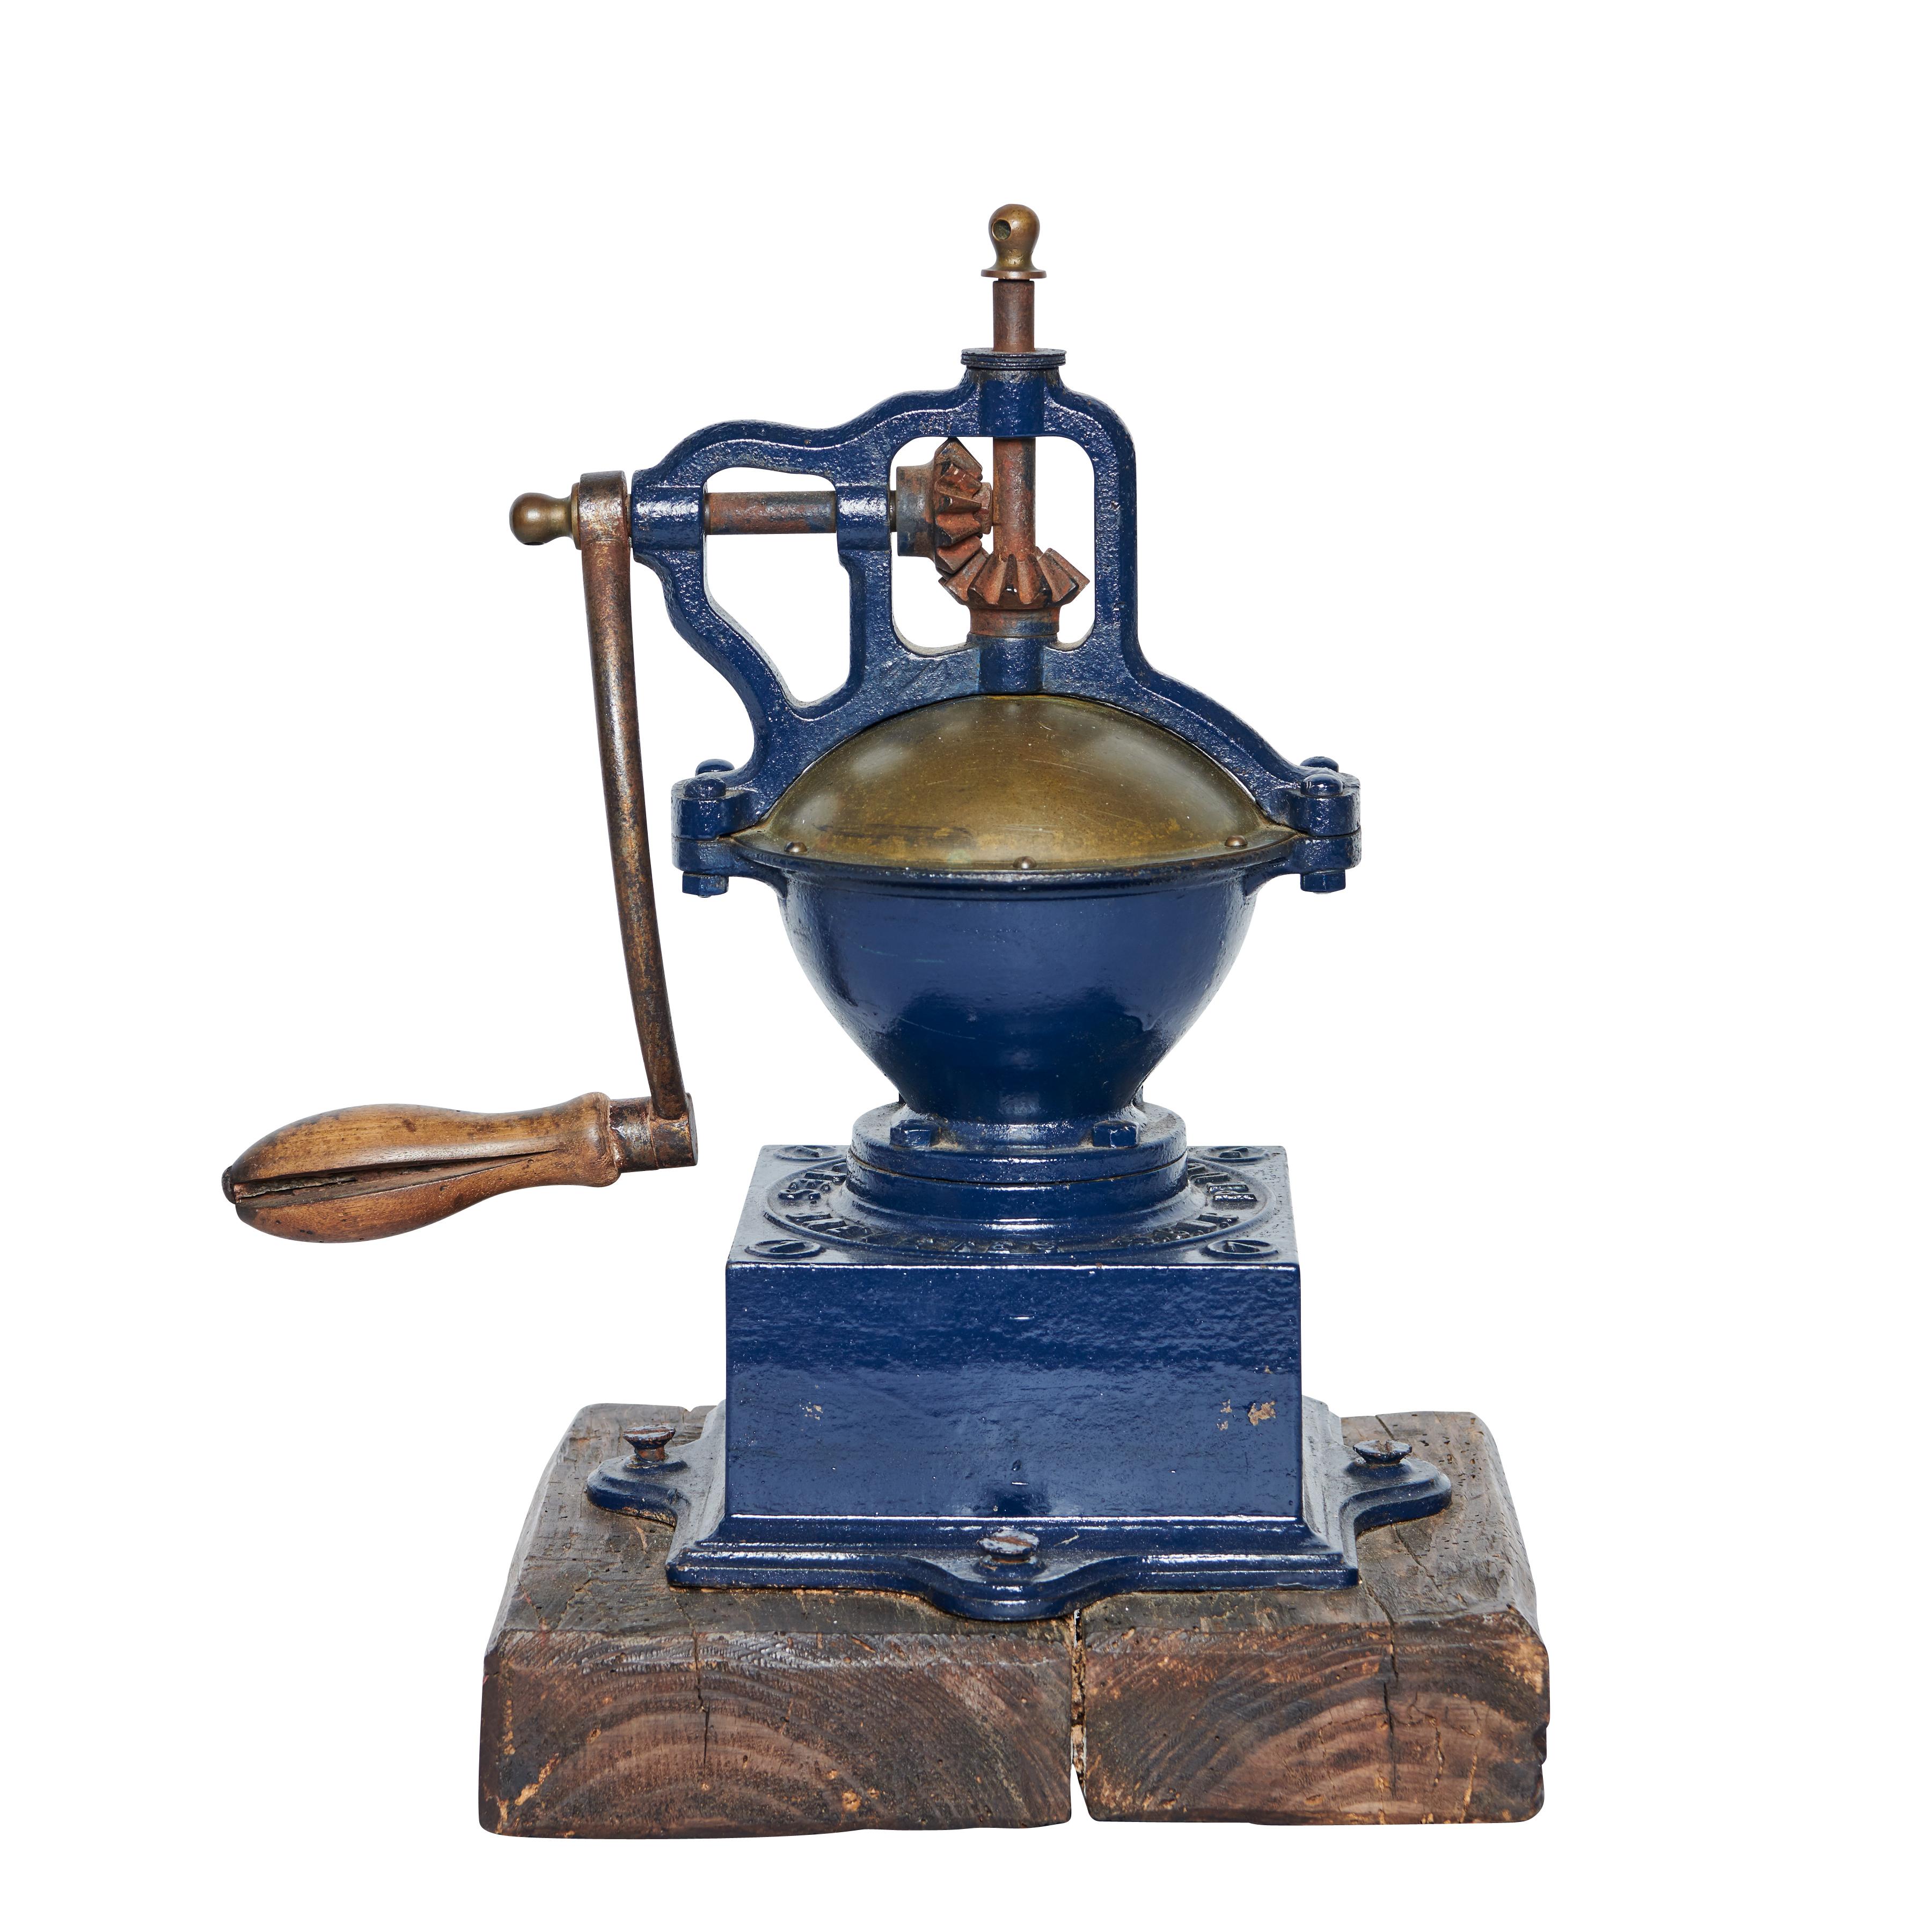 Late 19th Century, Antique Peugeot Frères Brevetés French Coffee Grinder For Sale